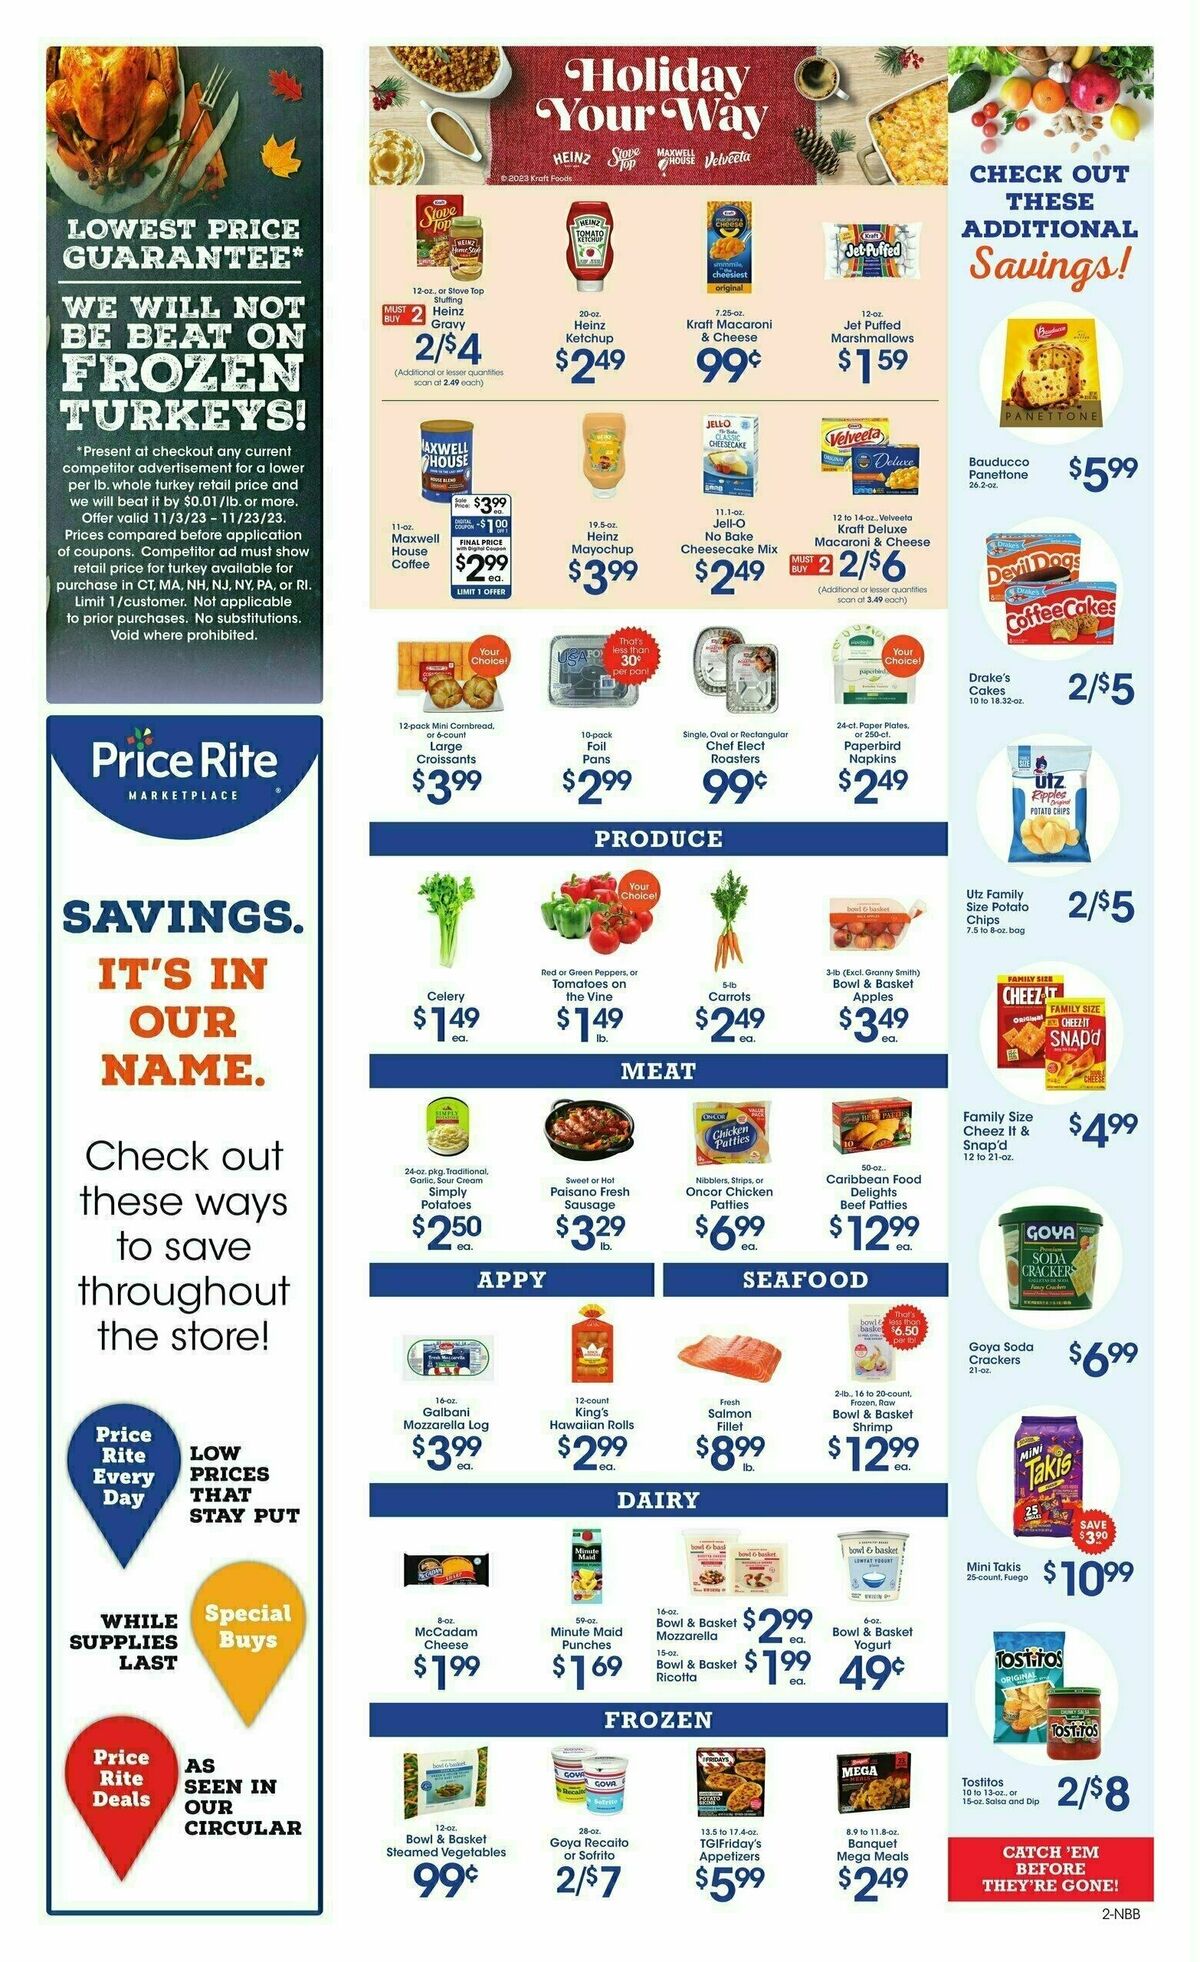 Price Rite Weekly Ad from November 3